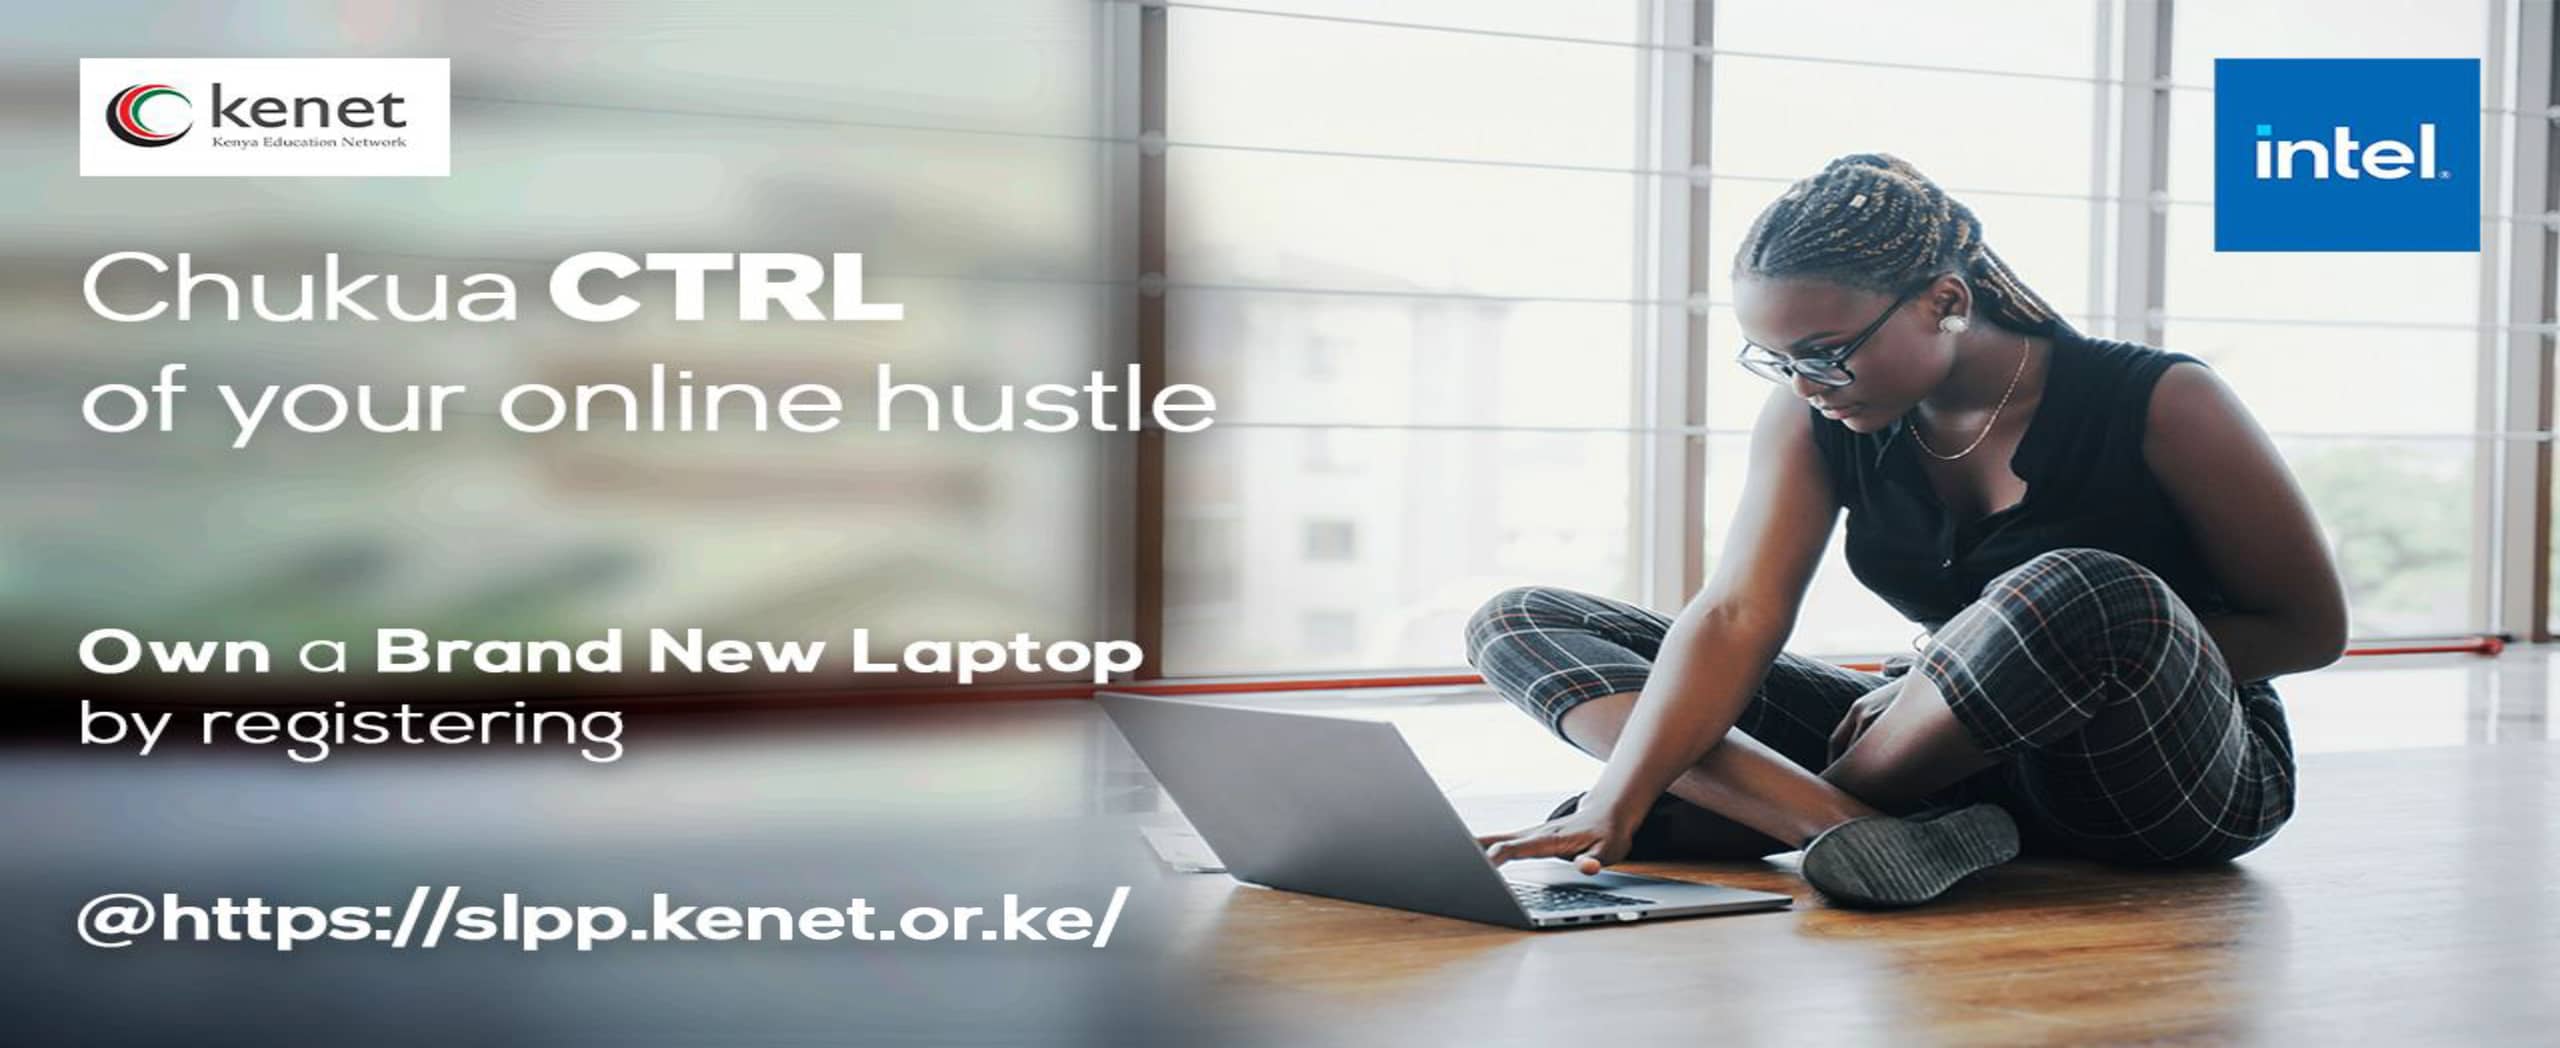 CLICK TO OWN A NEW LAPTOP WITH KENET